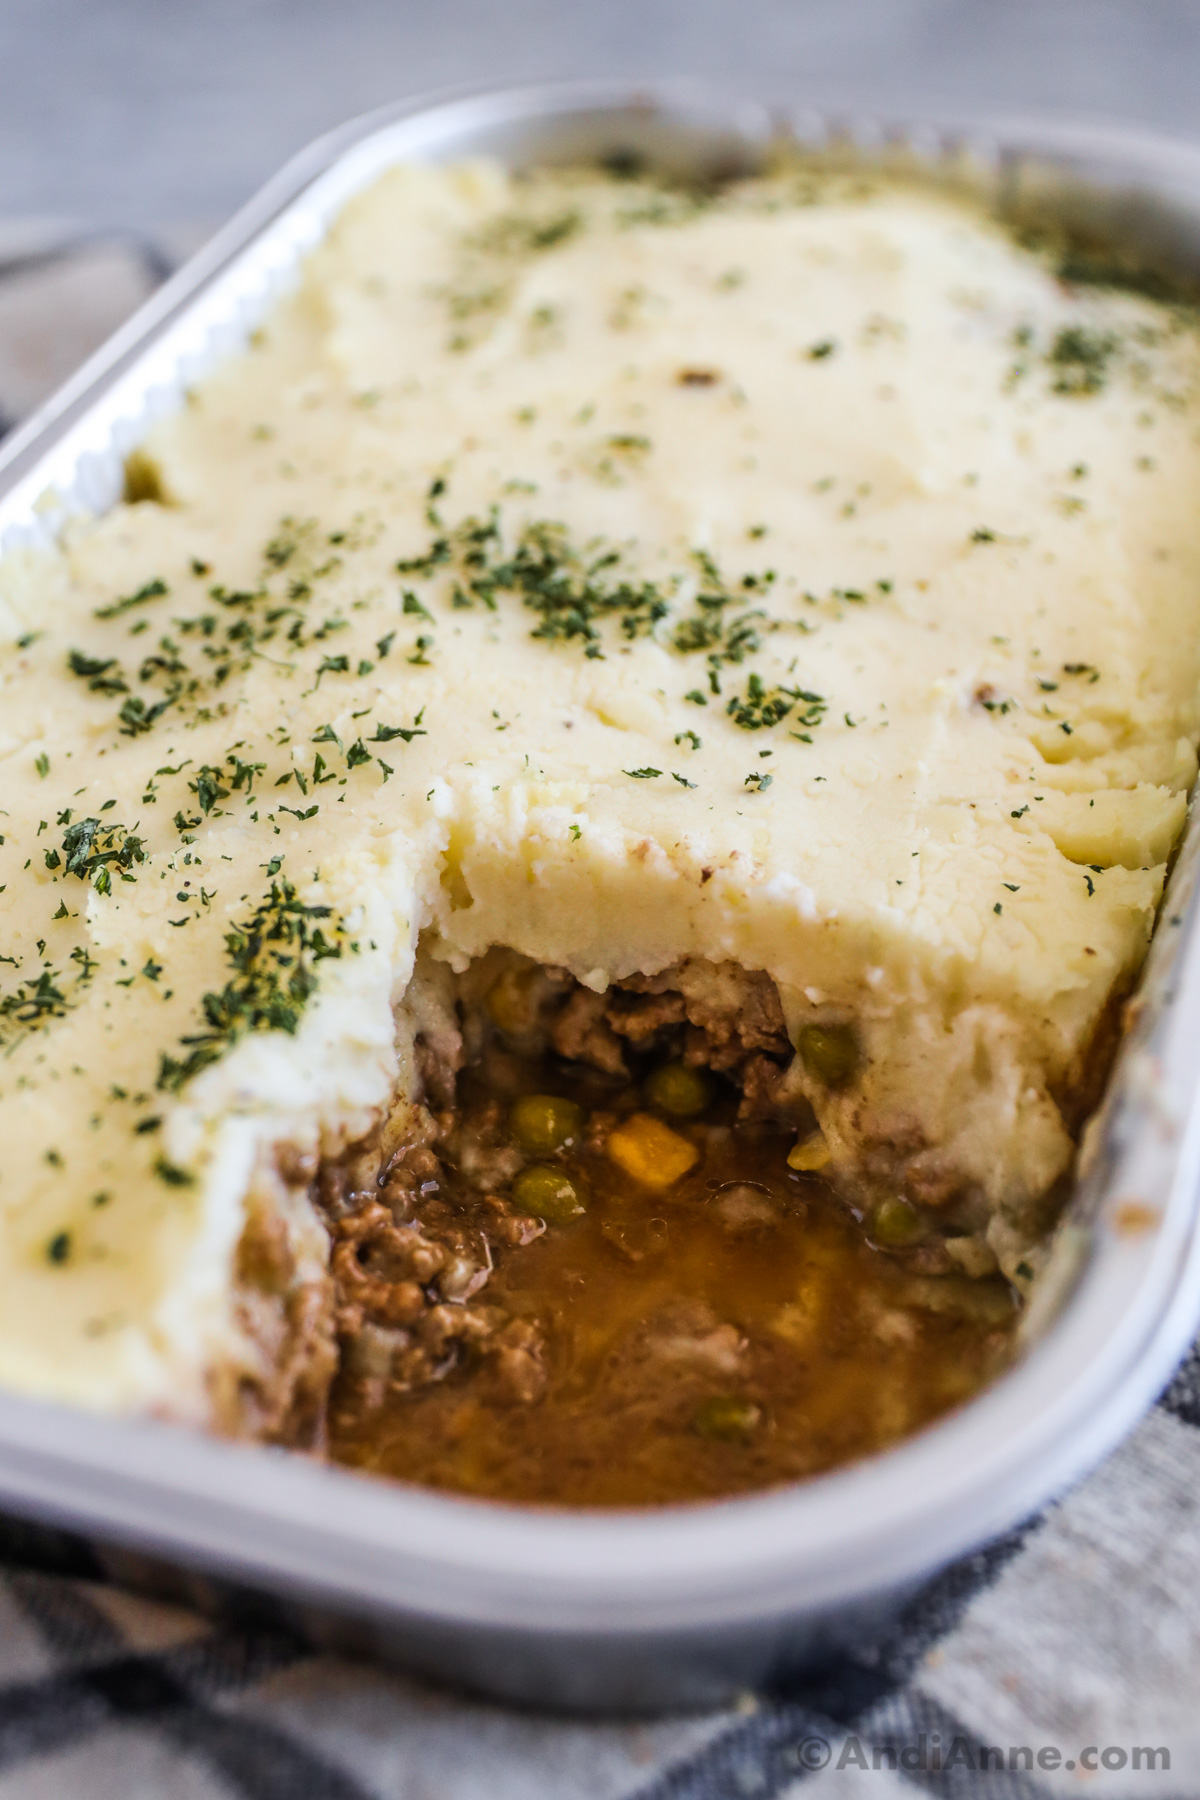 Close up of the layers inside a costco shepherds pie. You can see the top layer is mashed potatoes, and bottom layer is ground beef with peas and corn and a bit of liquid.